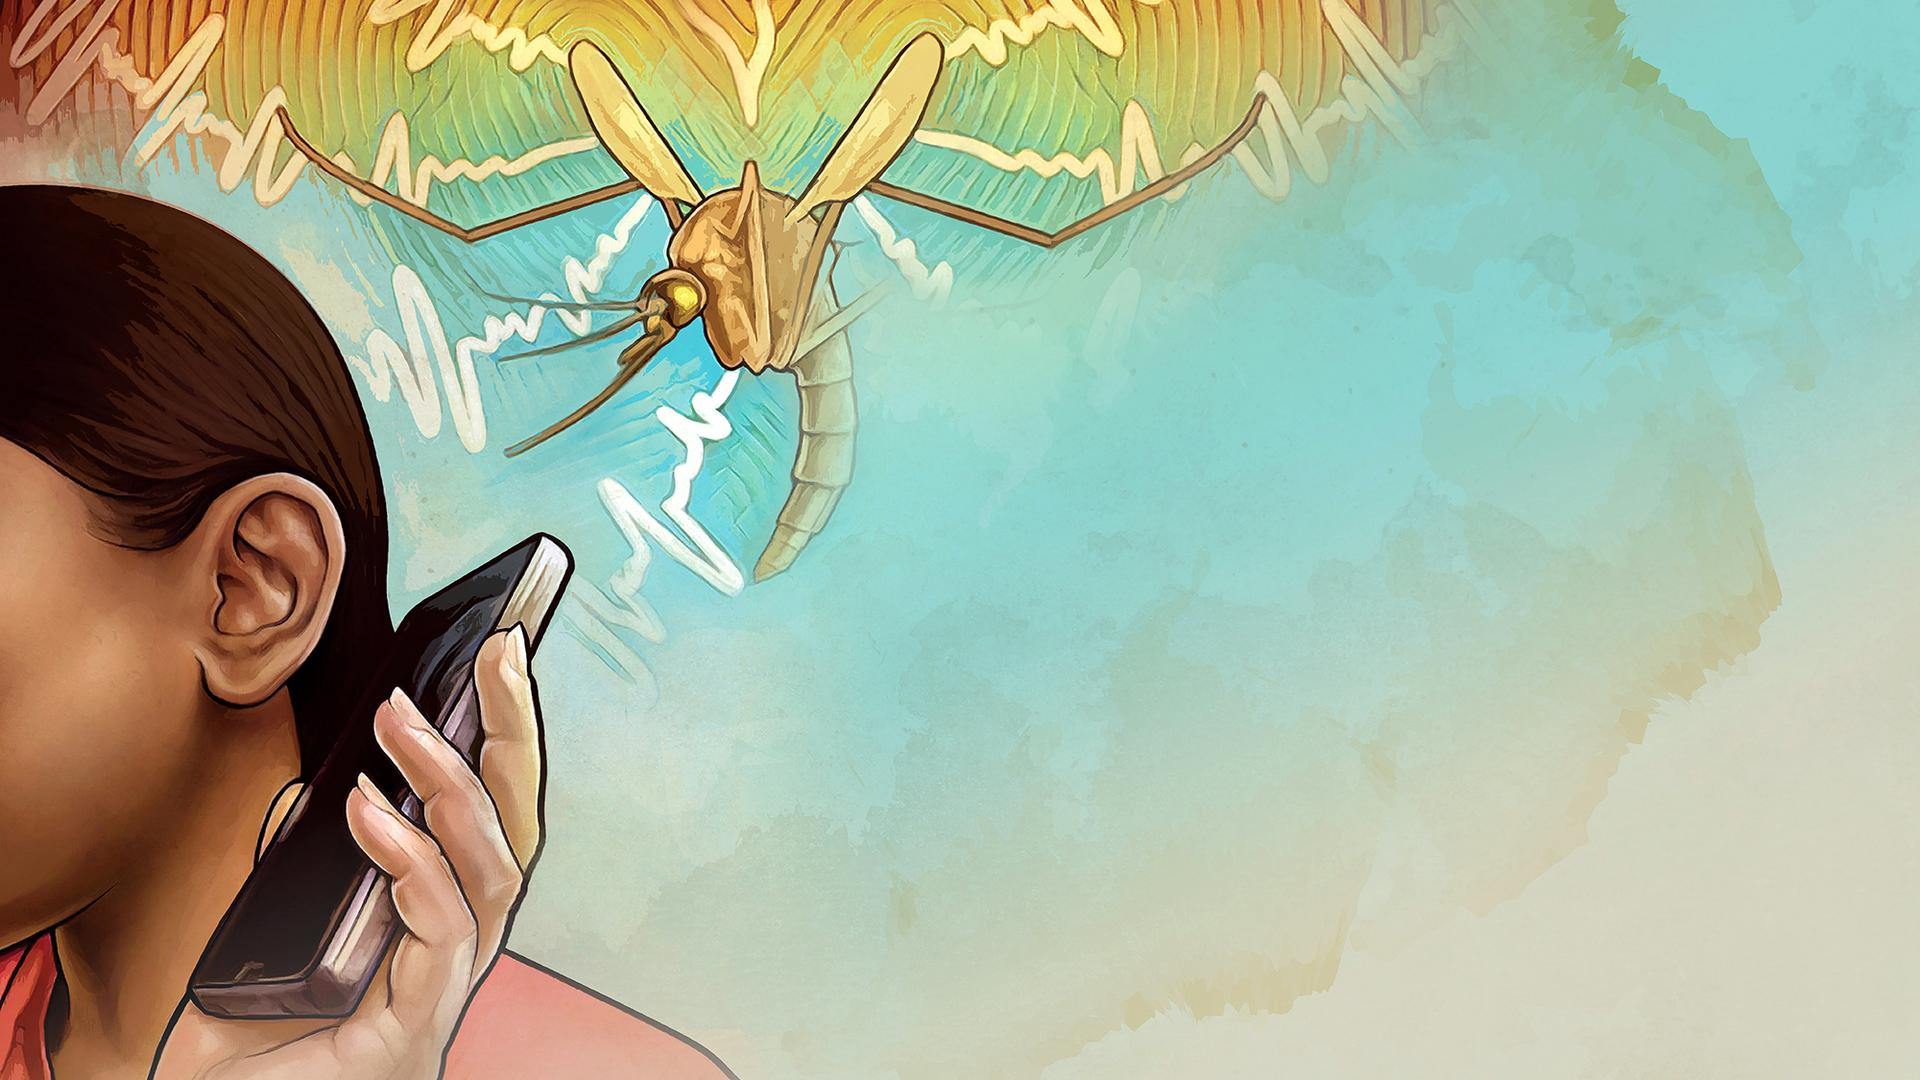 The Abuzz project hopes to help curb mosquito-borne illnesses by using cell phones to track mosquito outbreaks around the world.